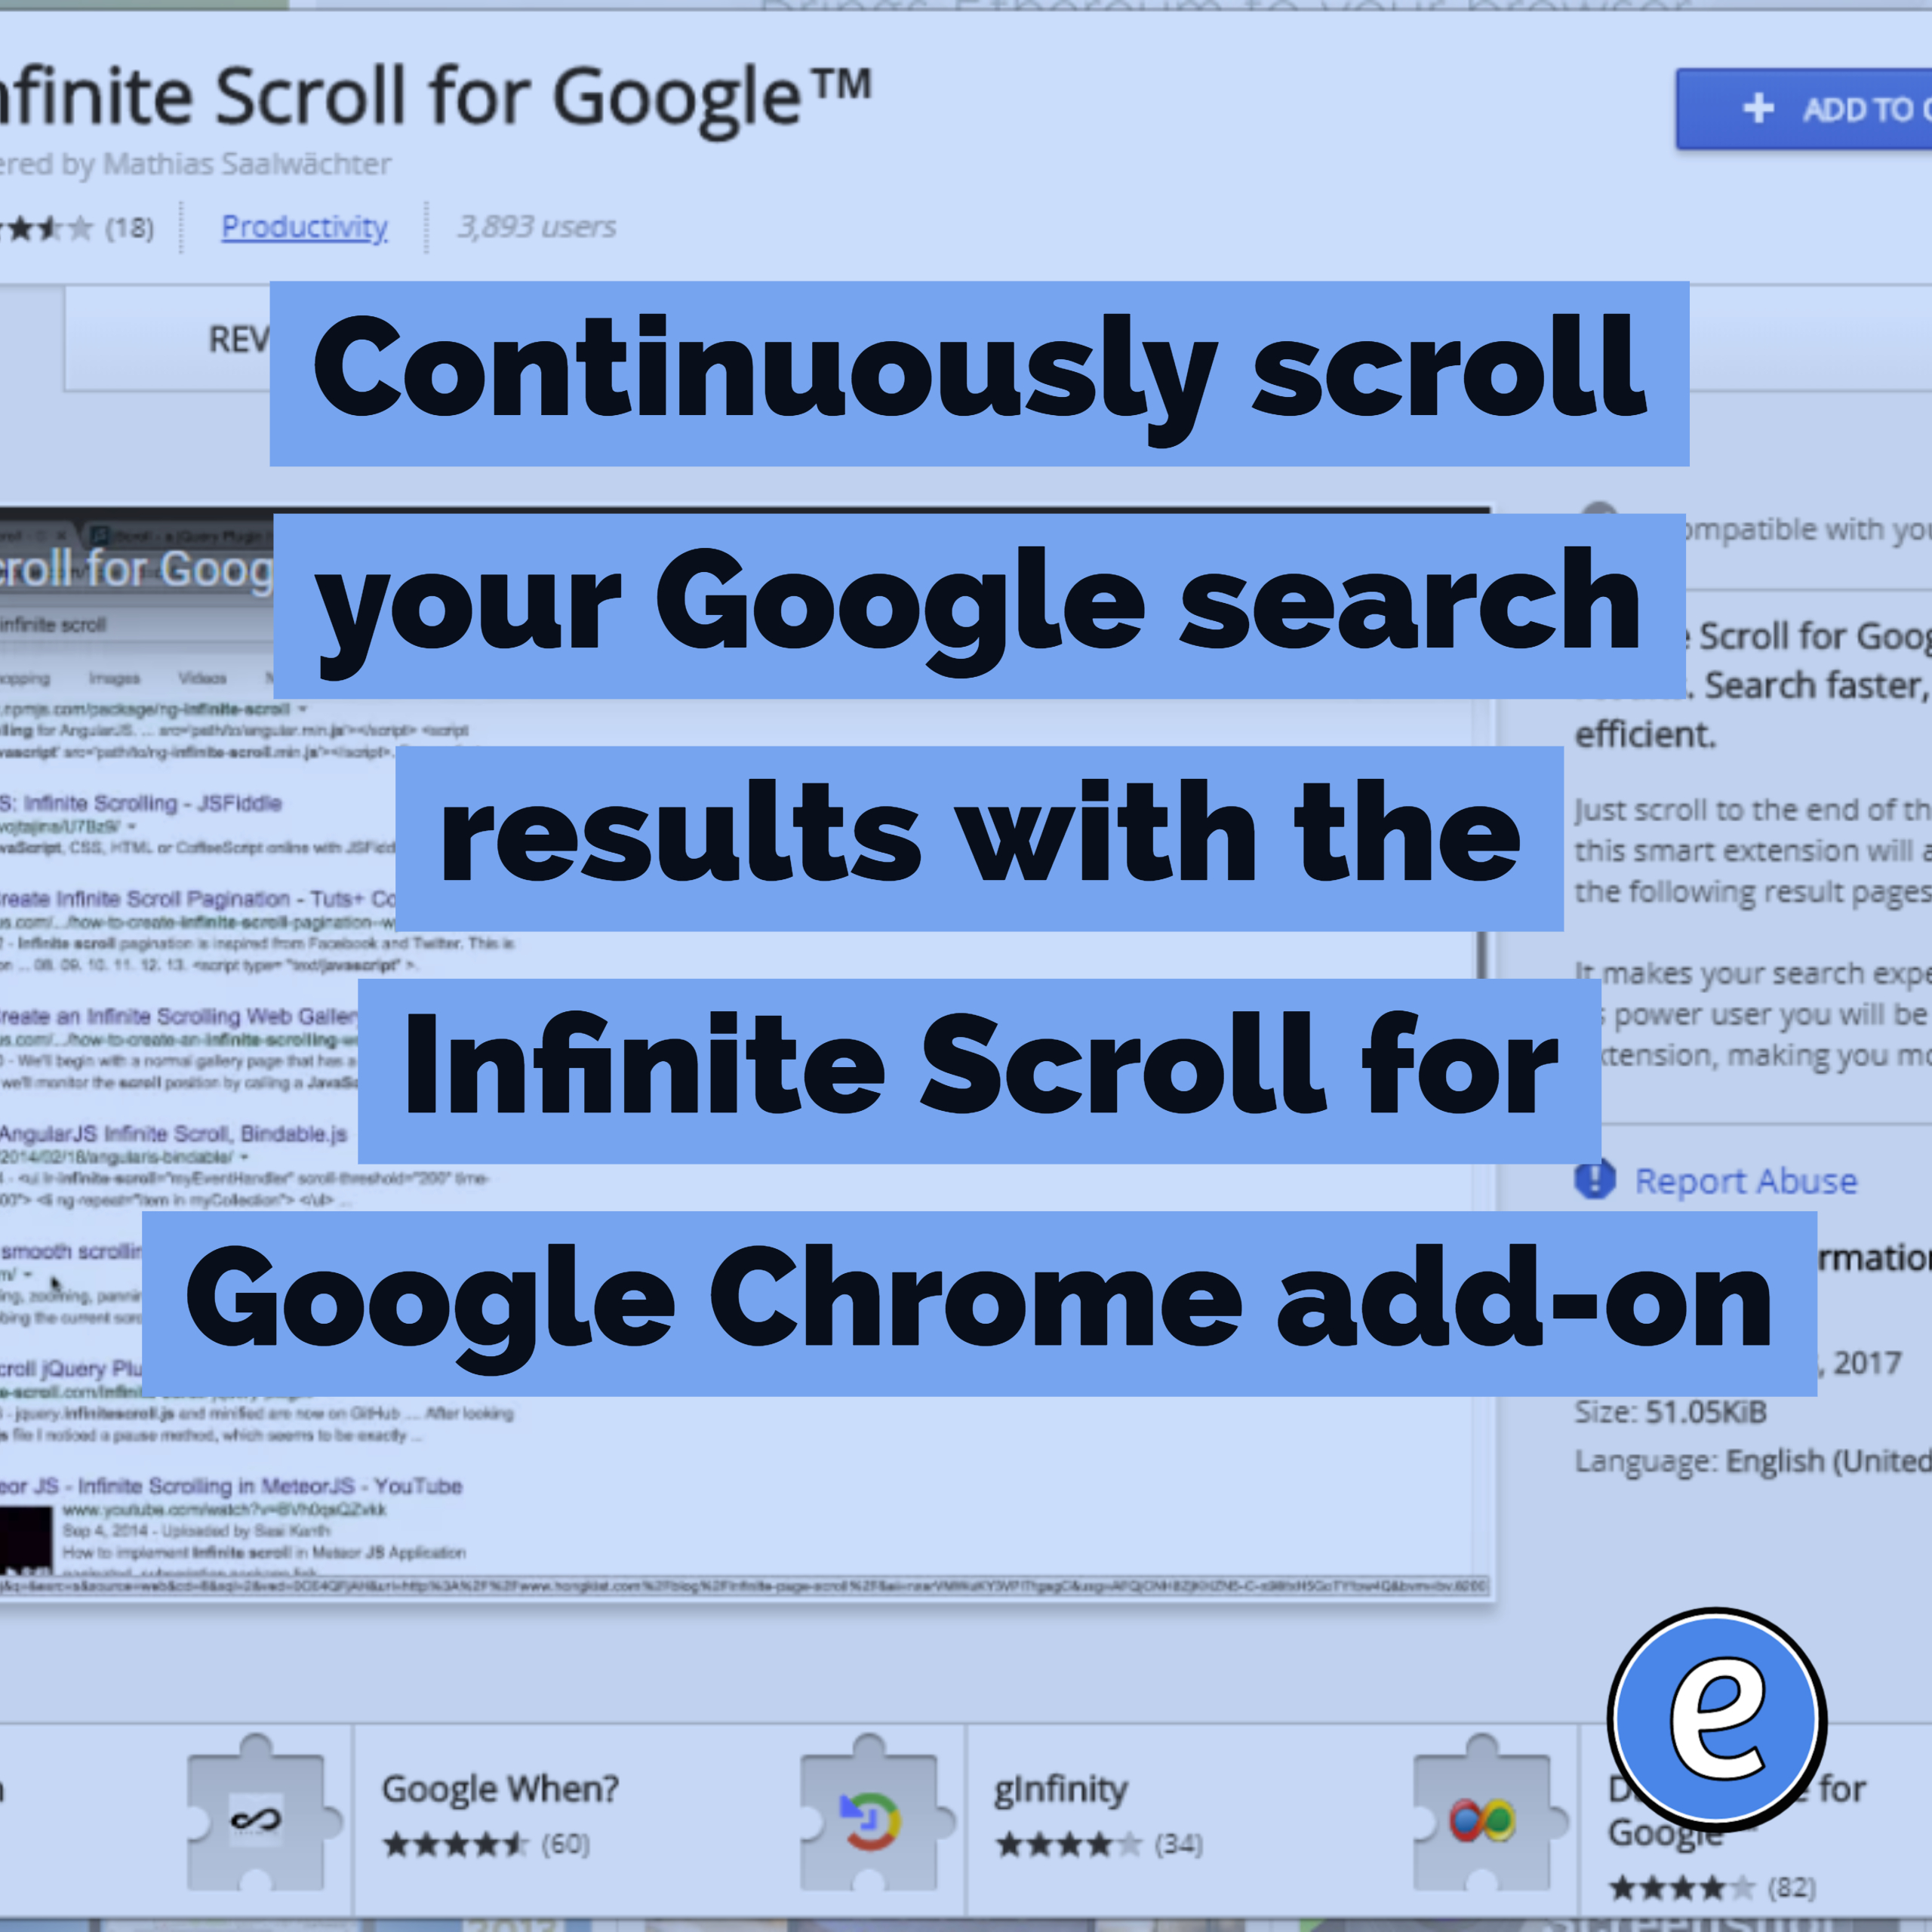 Continuously scroll your Google search results with the Infinite Scroll for Google Chrome add-on